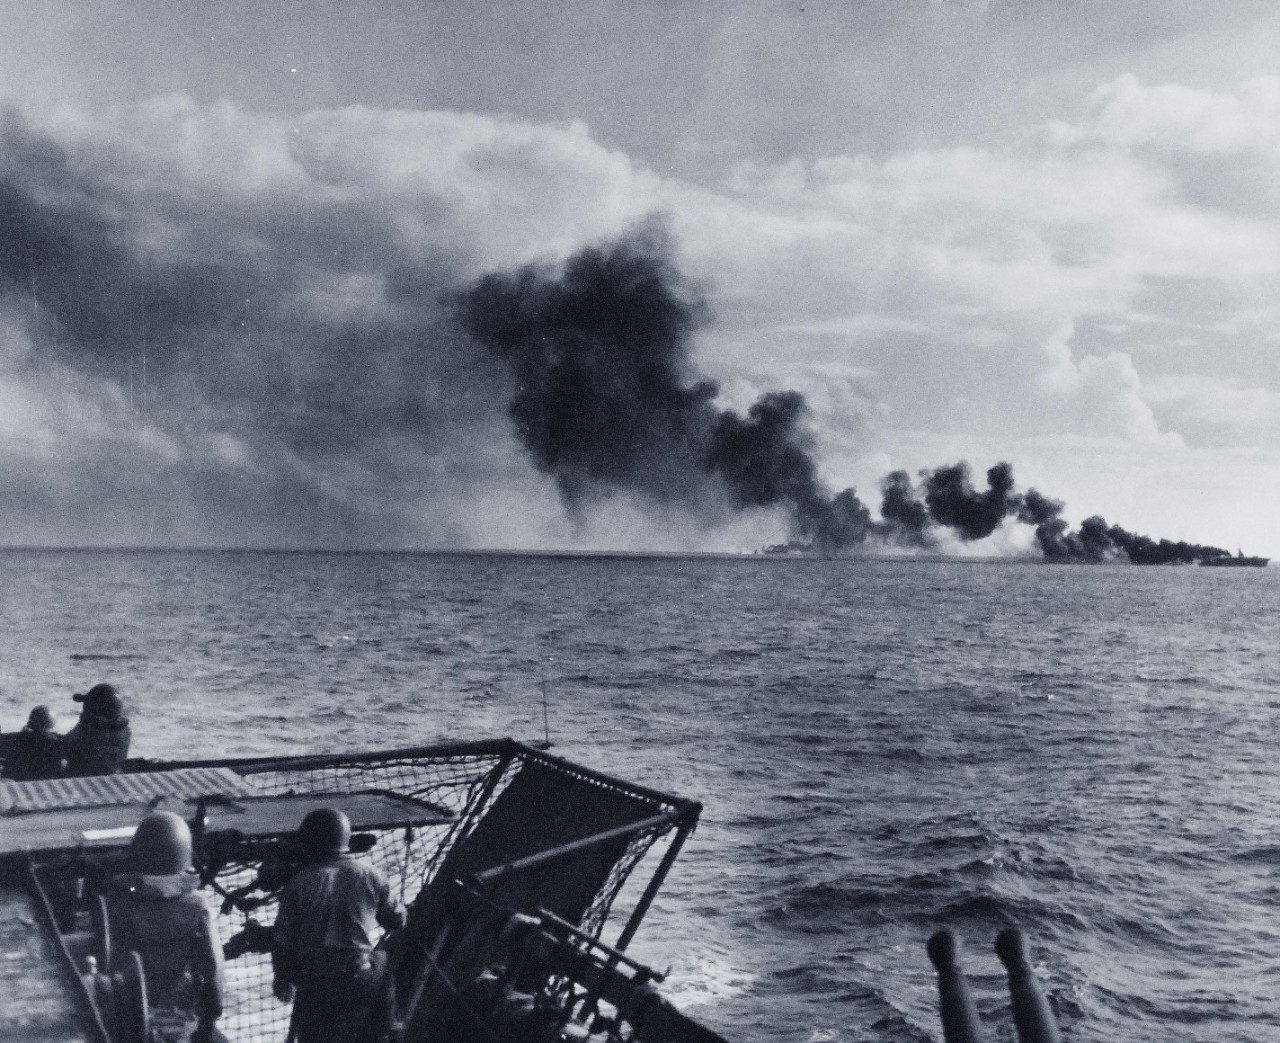 80-G-384160:  Battle of Leyte Gulf, Battle off Samar, October 25, 1944. CVE, possibly USS Gambier Bay (CVE-73) receives attack by Japanese surface units, as seen from USS White Plains (CVE-66). Official U.S. Navy Photograph, now in the collections of the National Archives.    (2015/3/4).